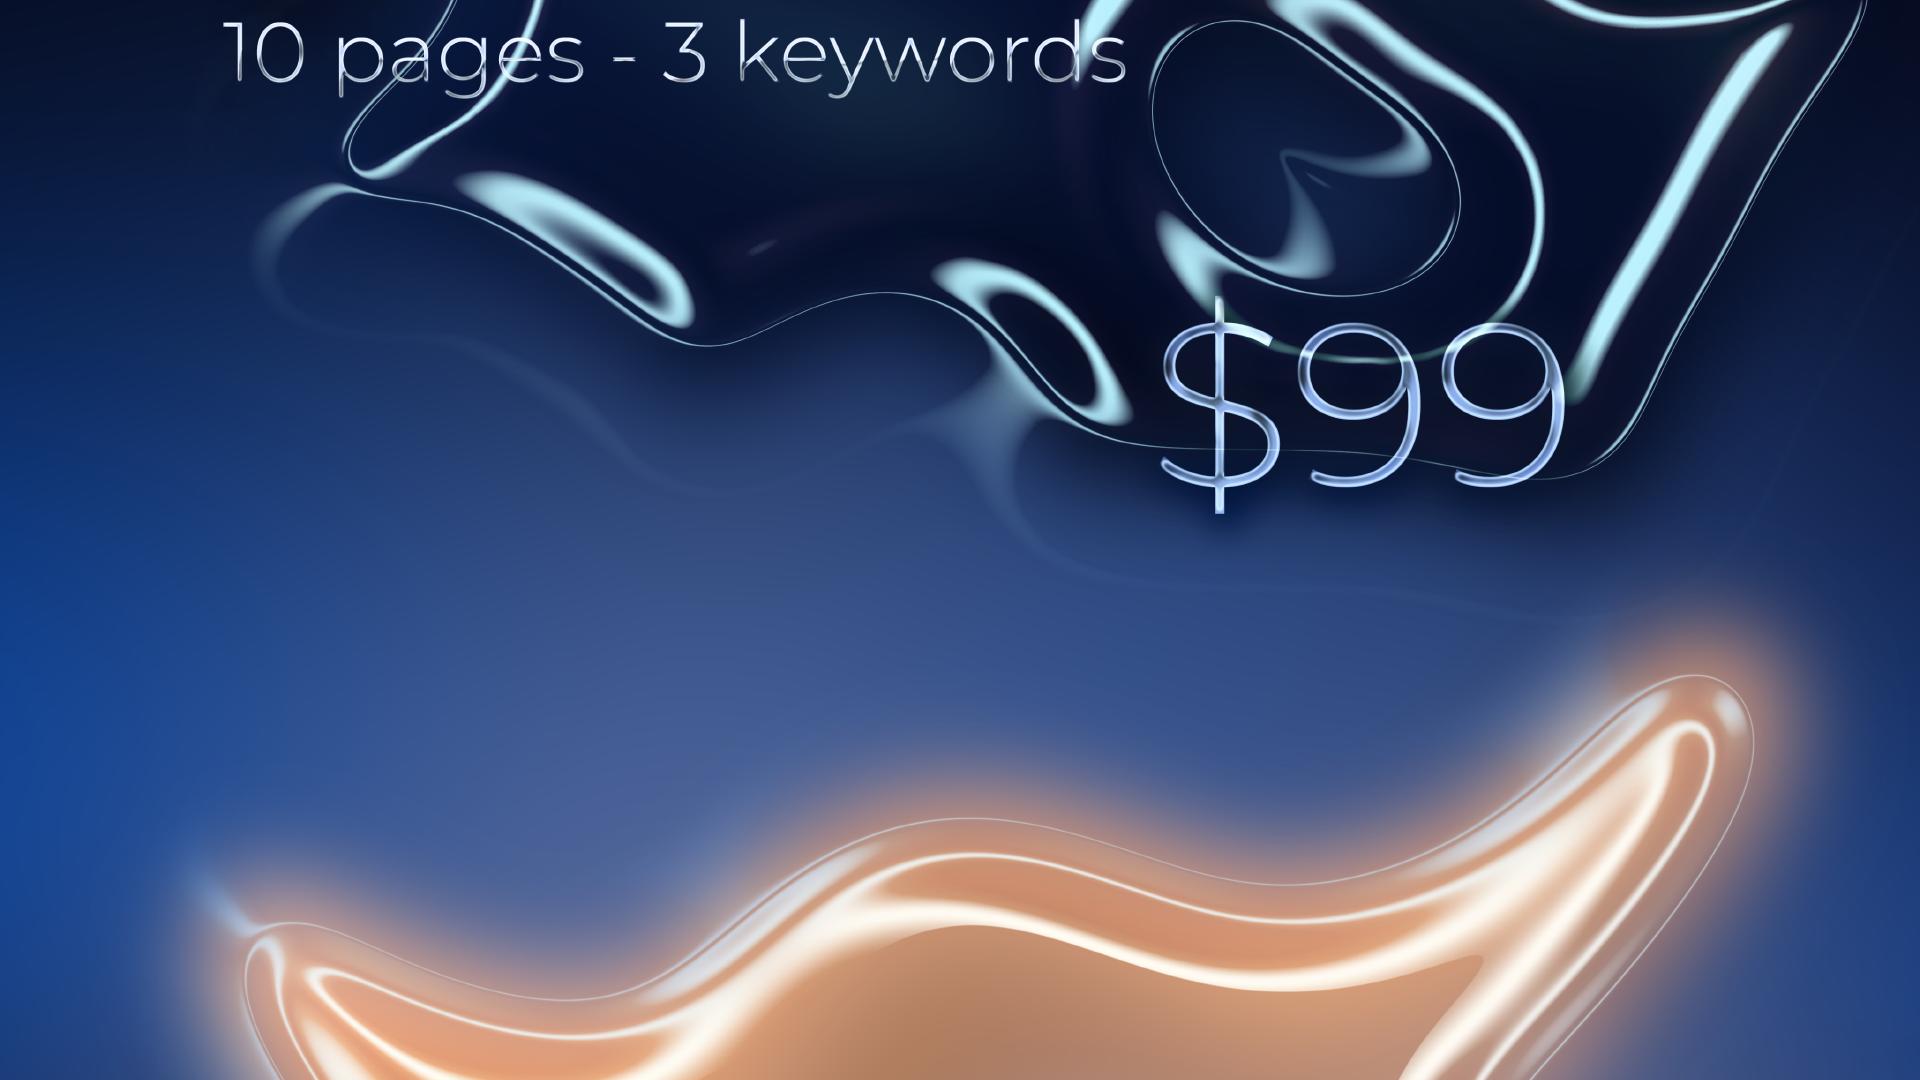 ... 10 pages - 3 keywords for $99